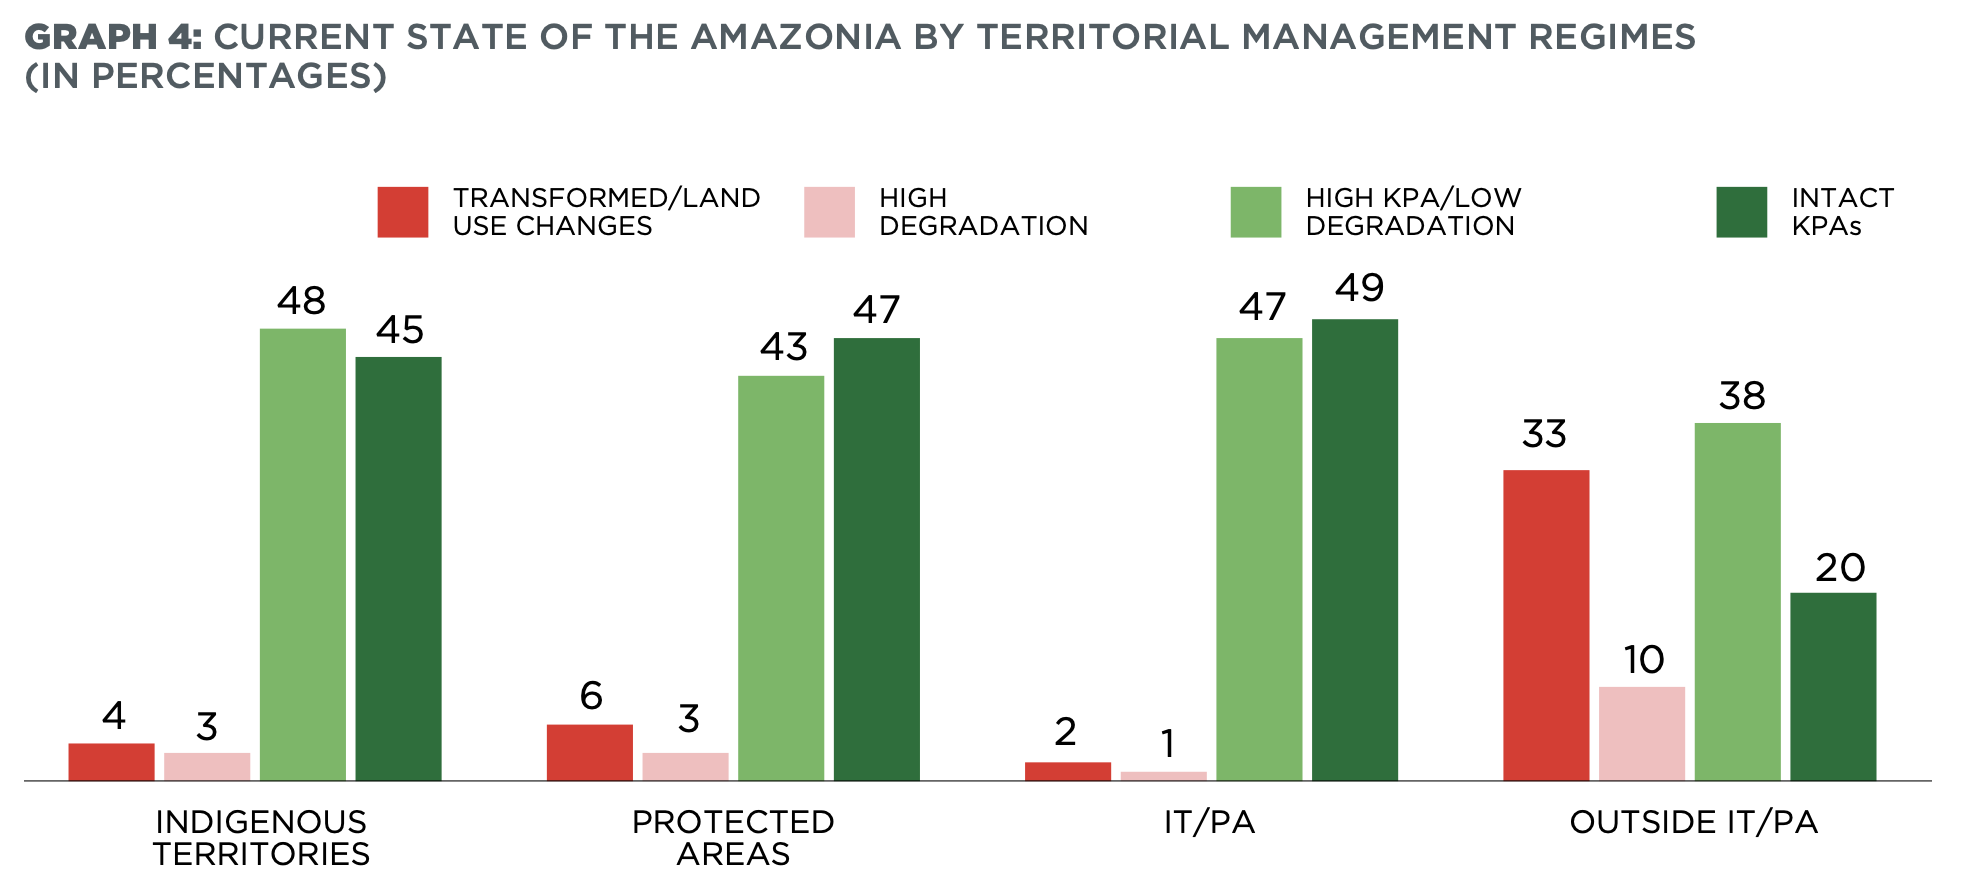 Current state of the Amazonia by territorial management regimes. Image credit: RAISG